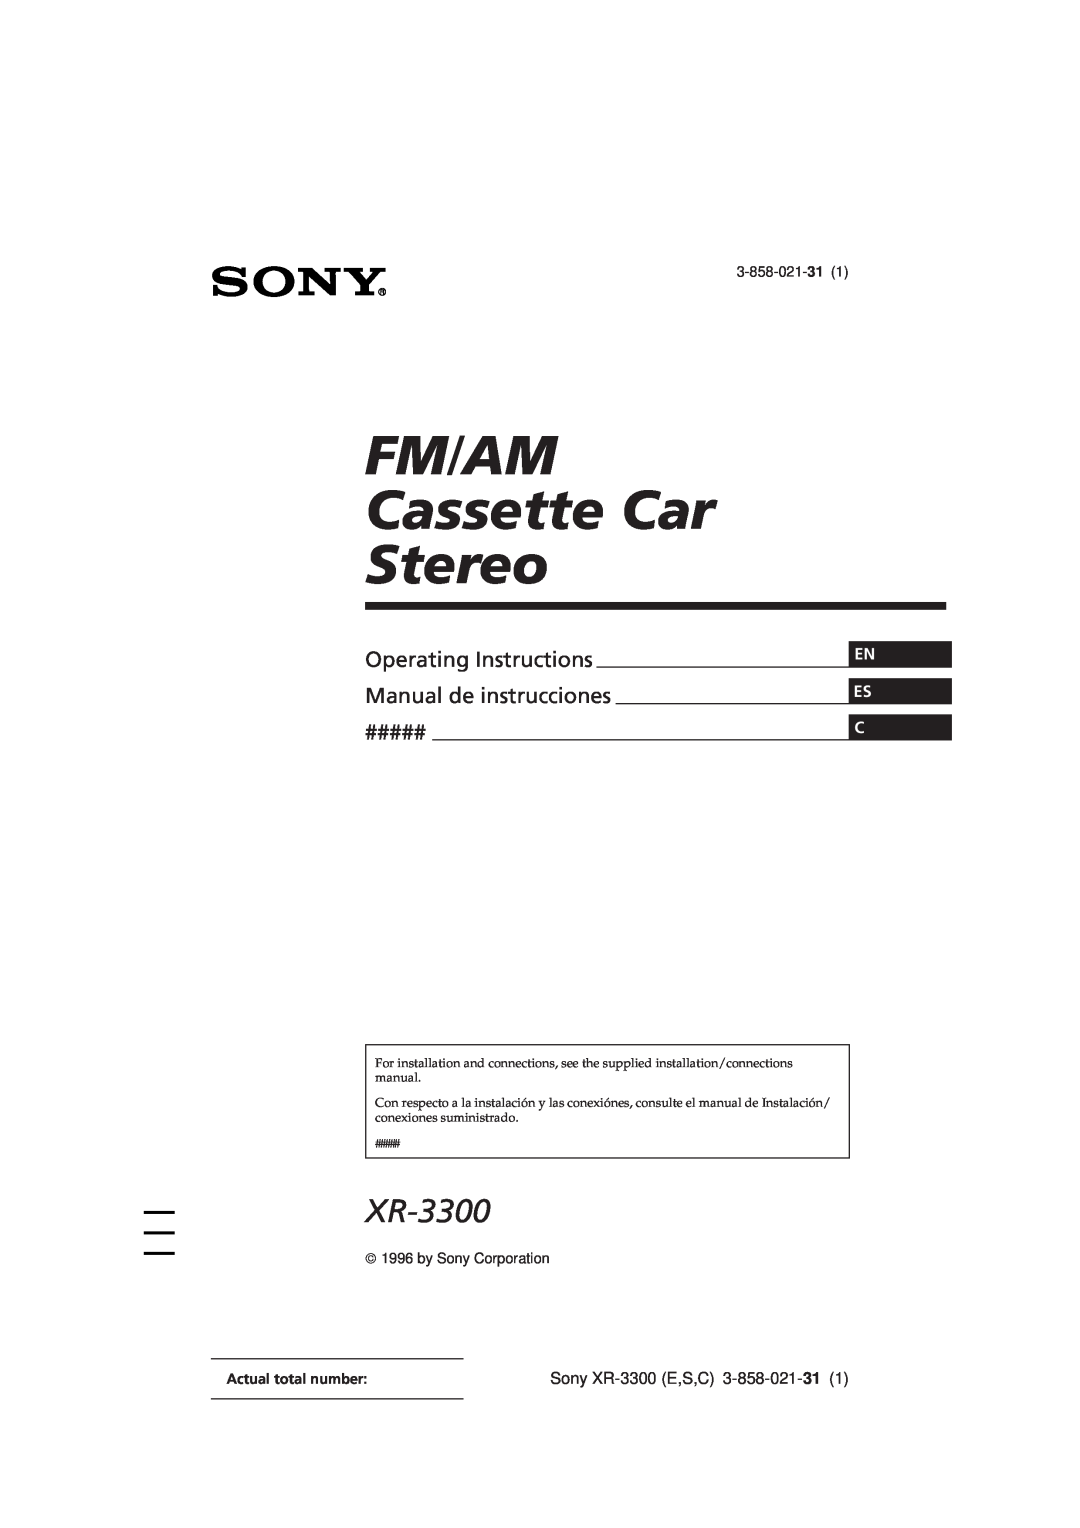 Sony manual Sony XR-3300E,S,C, 3-858-021-31, ã1996 by Sony Corporation, Actual total number, FM/AM Cassette Car Stereo 